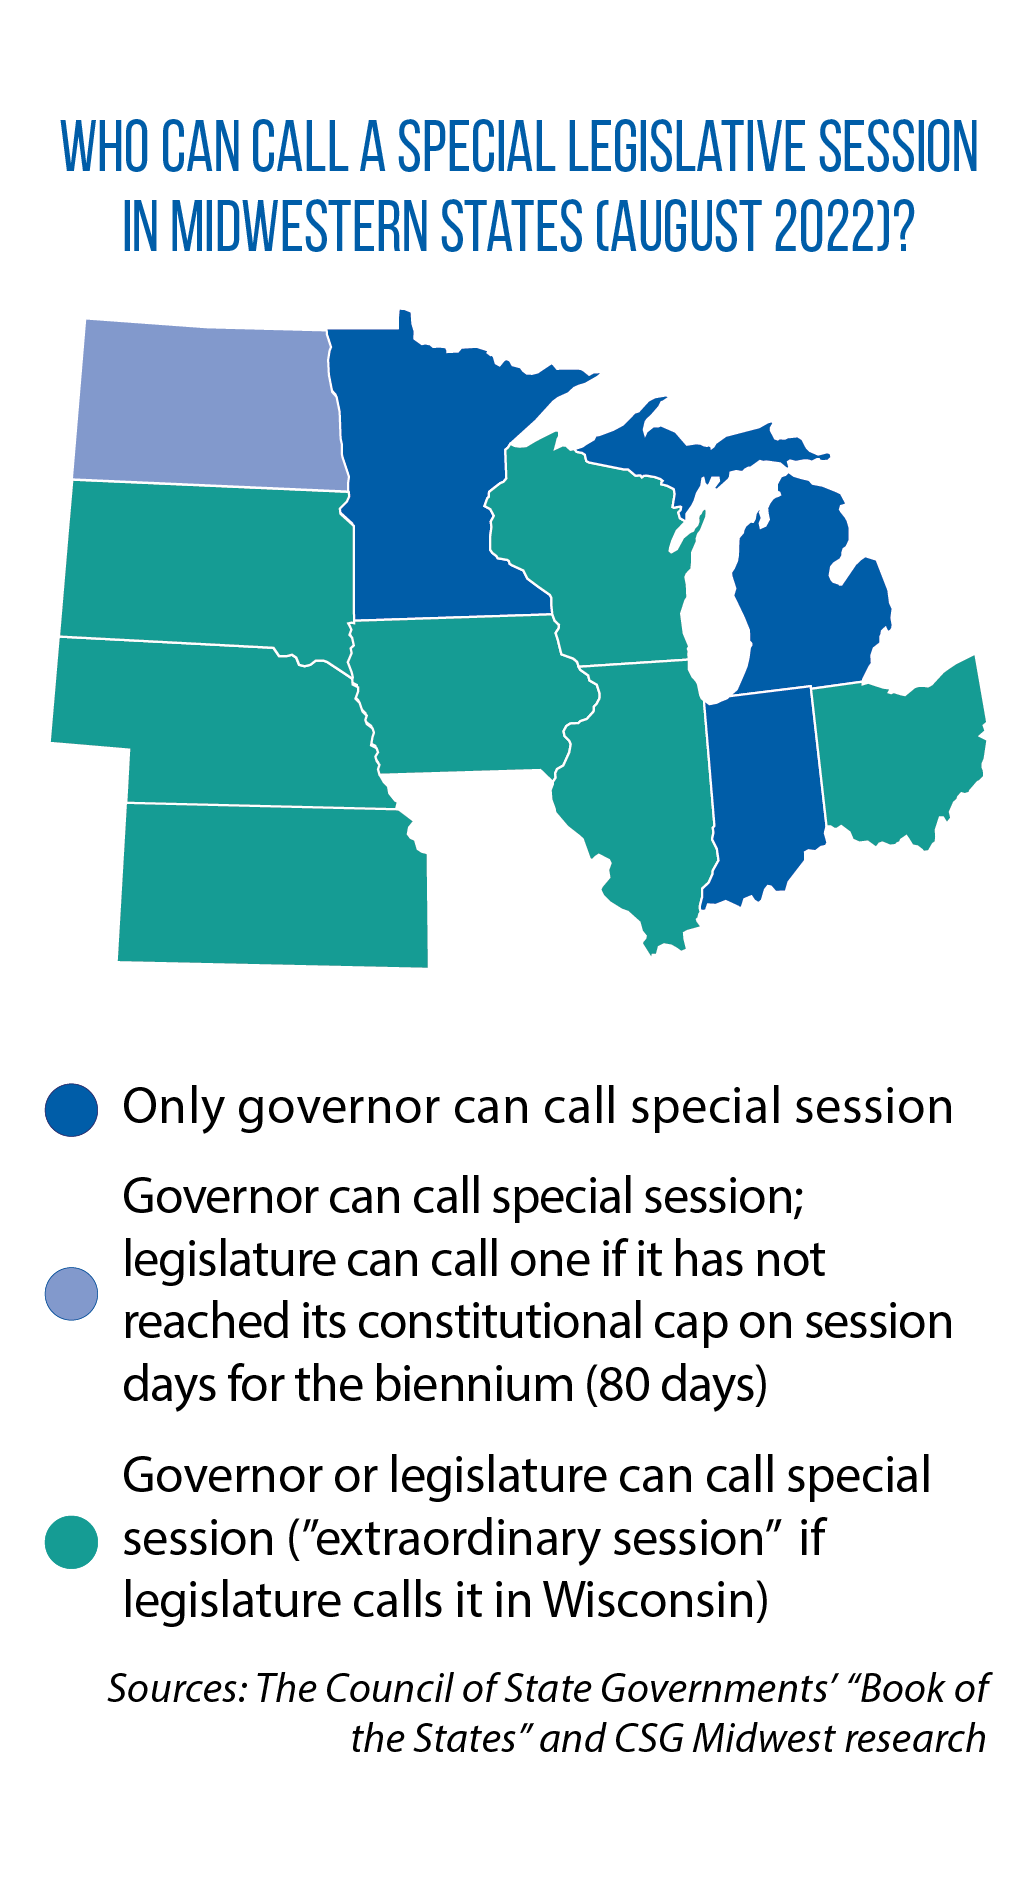 Map showing who can call a special legislative session in Midwestern states as of August 2022